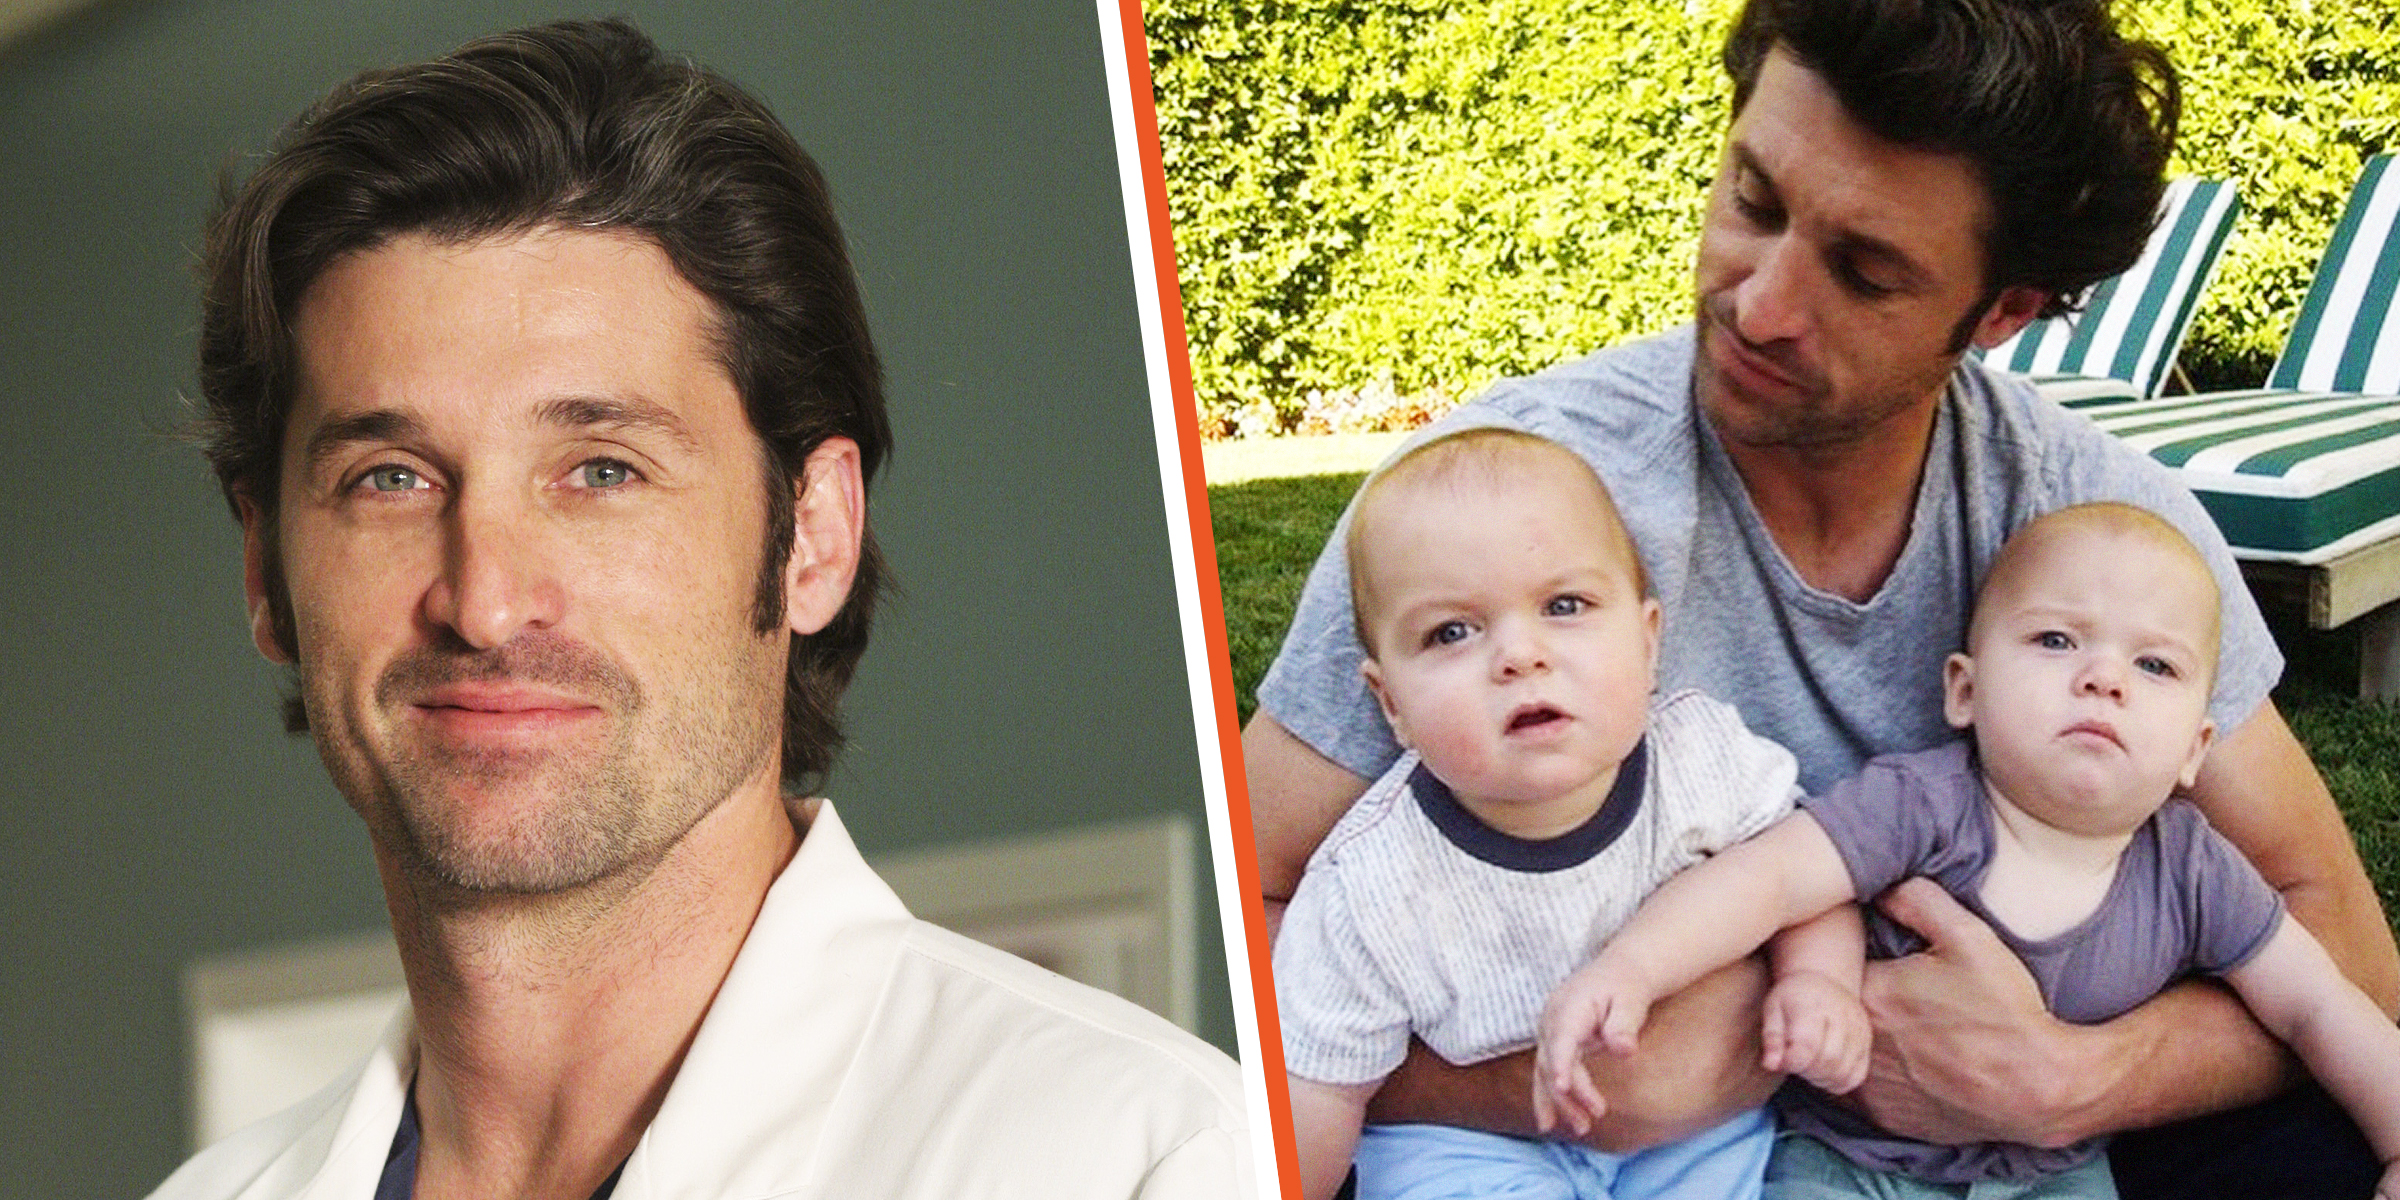 Patrick Dempsey as Dr. Derek Shepherd. | Patrick Dempsey and his twin sons, Darby and Sullivan Dempsey. | Sources: Getty Images | Instagram/patrickdempsey